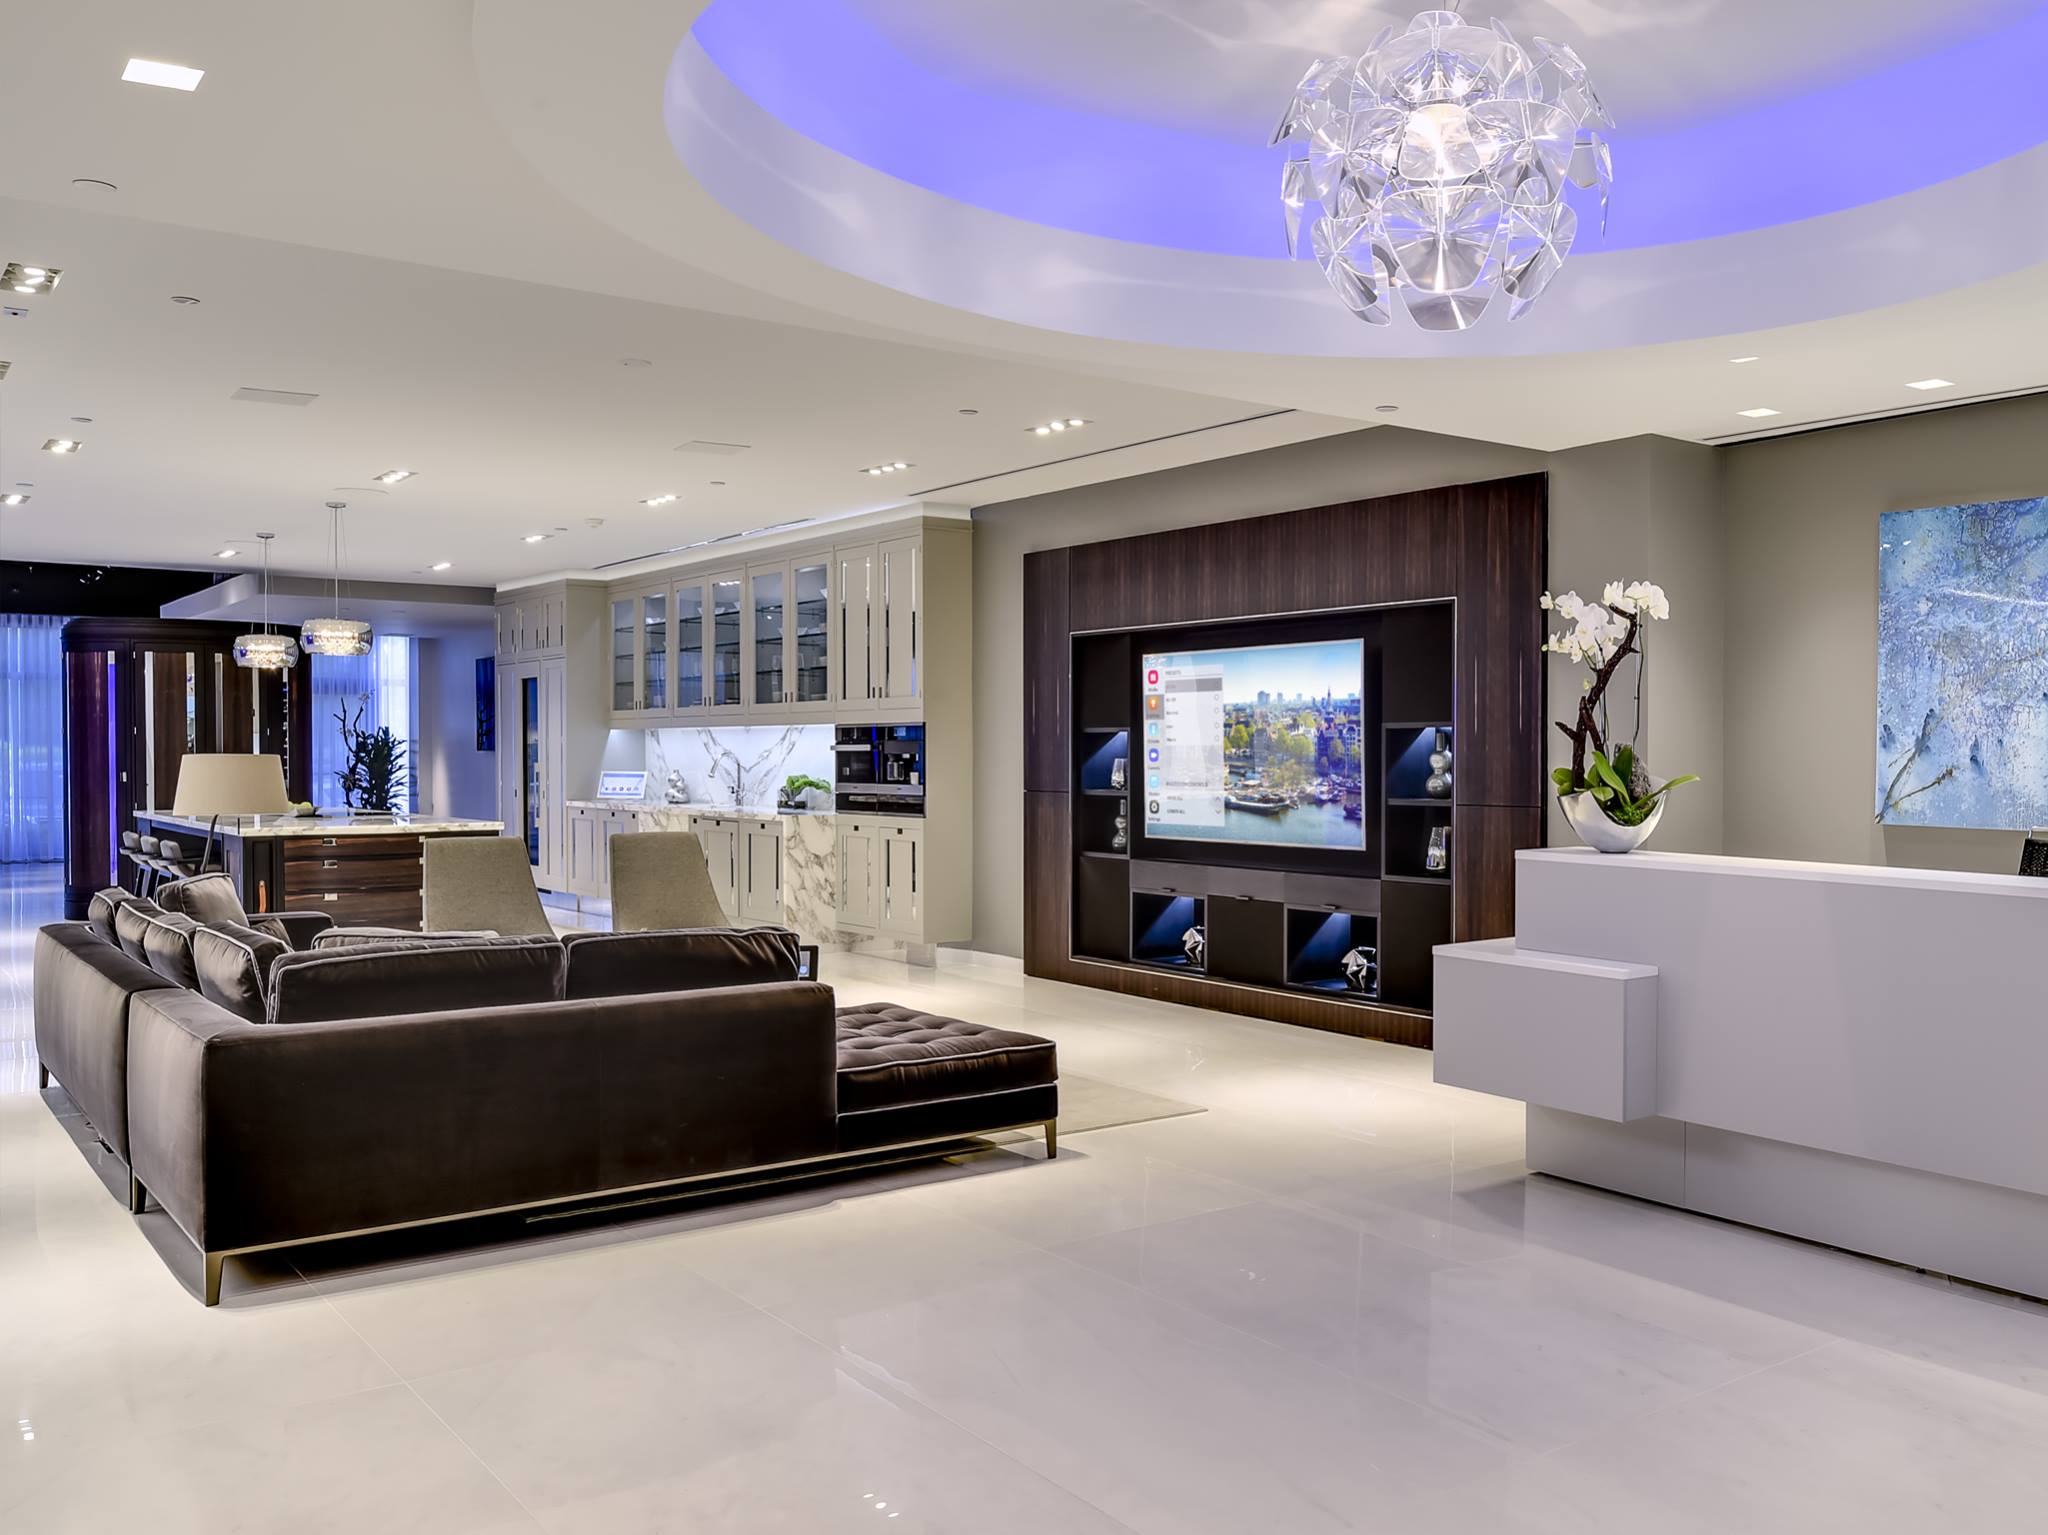 The latest home automation systems installed by an attentive team of professionals …